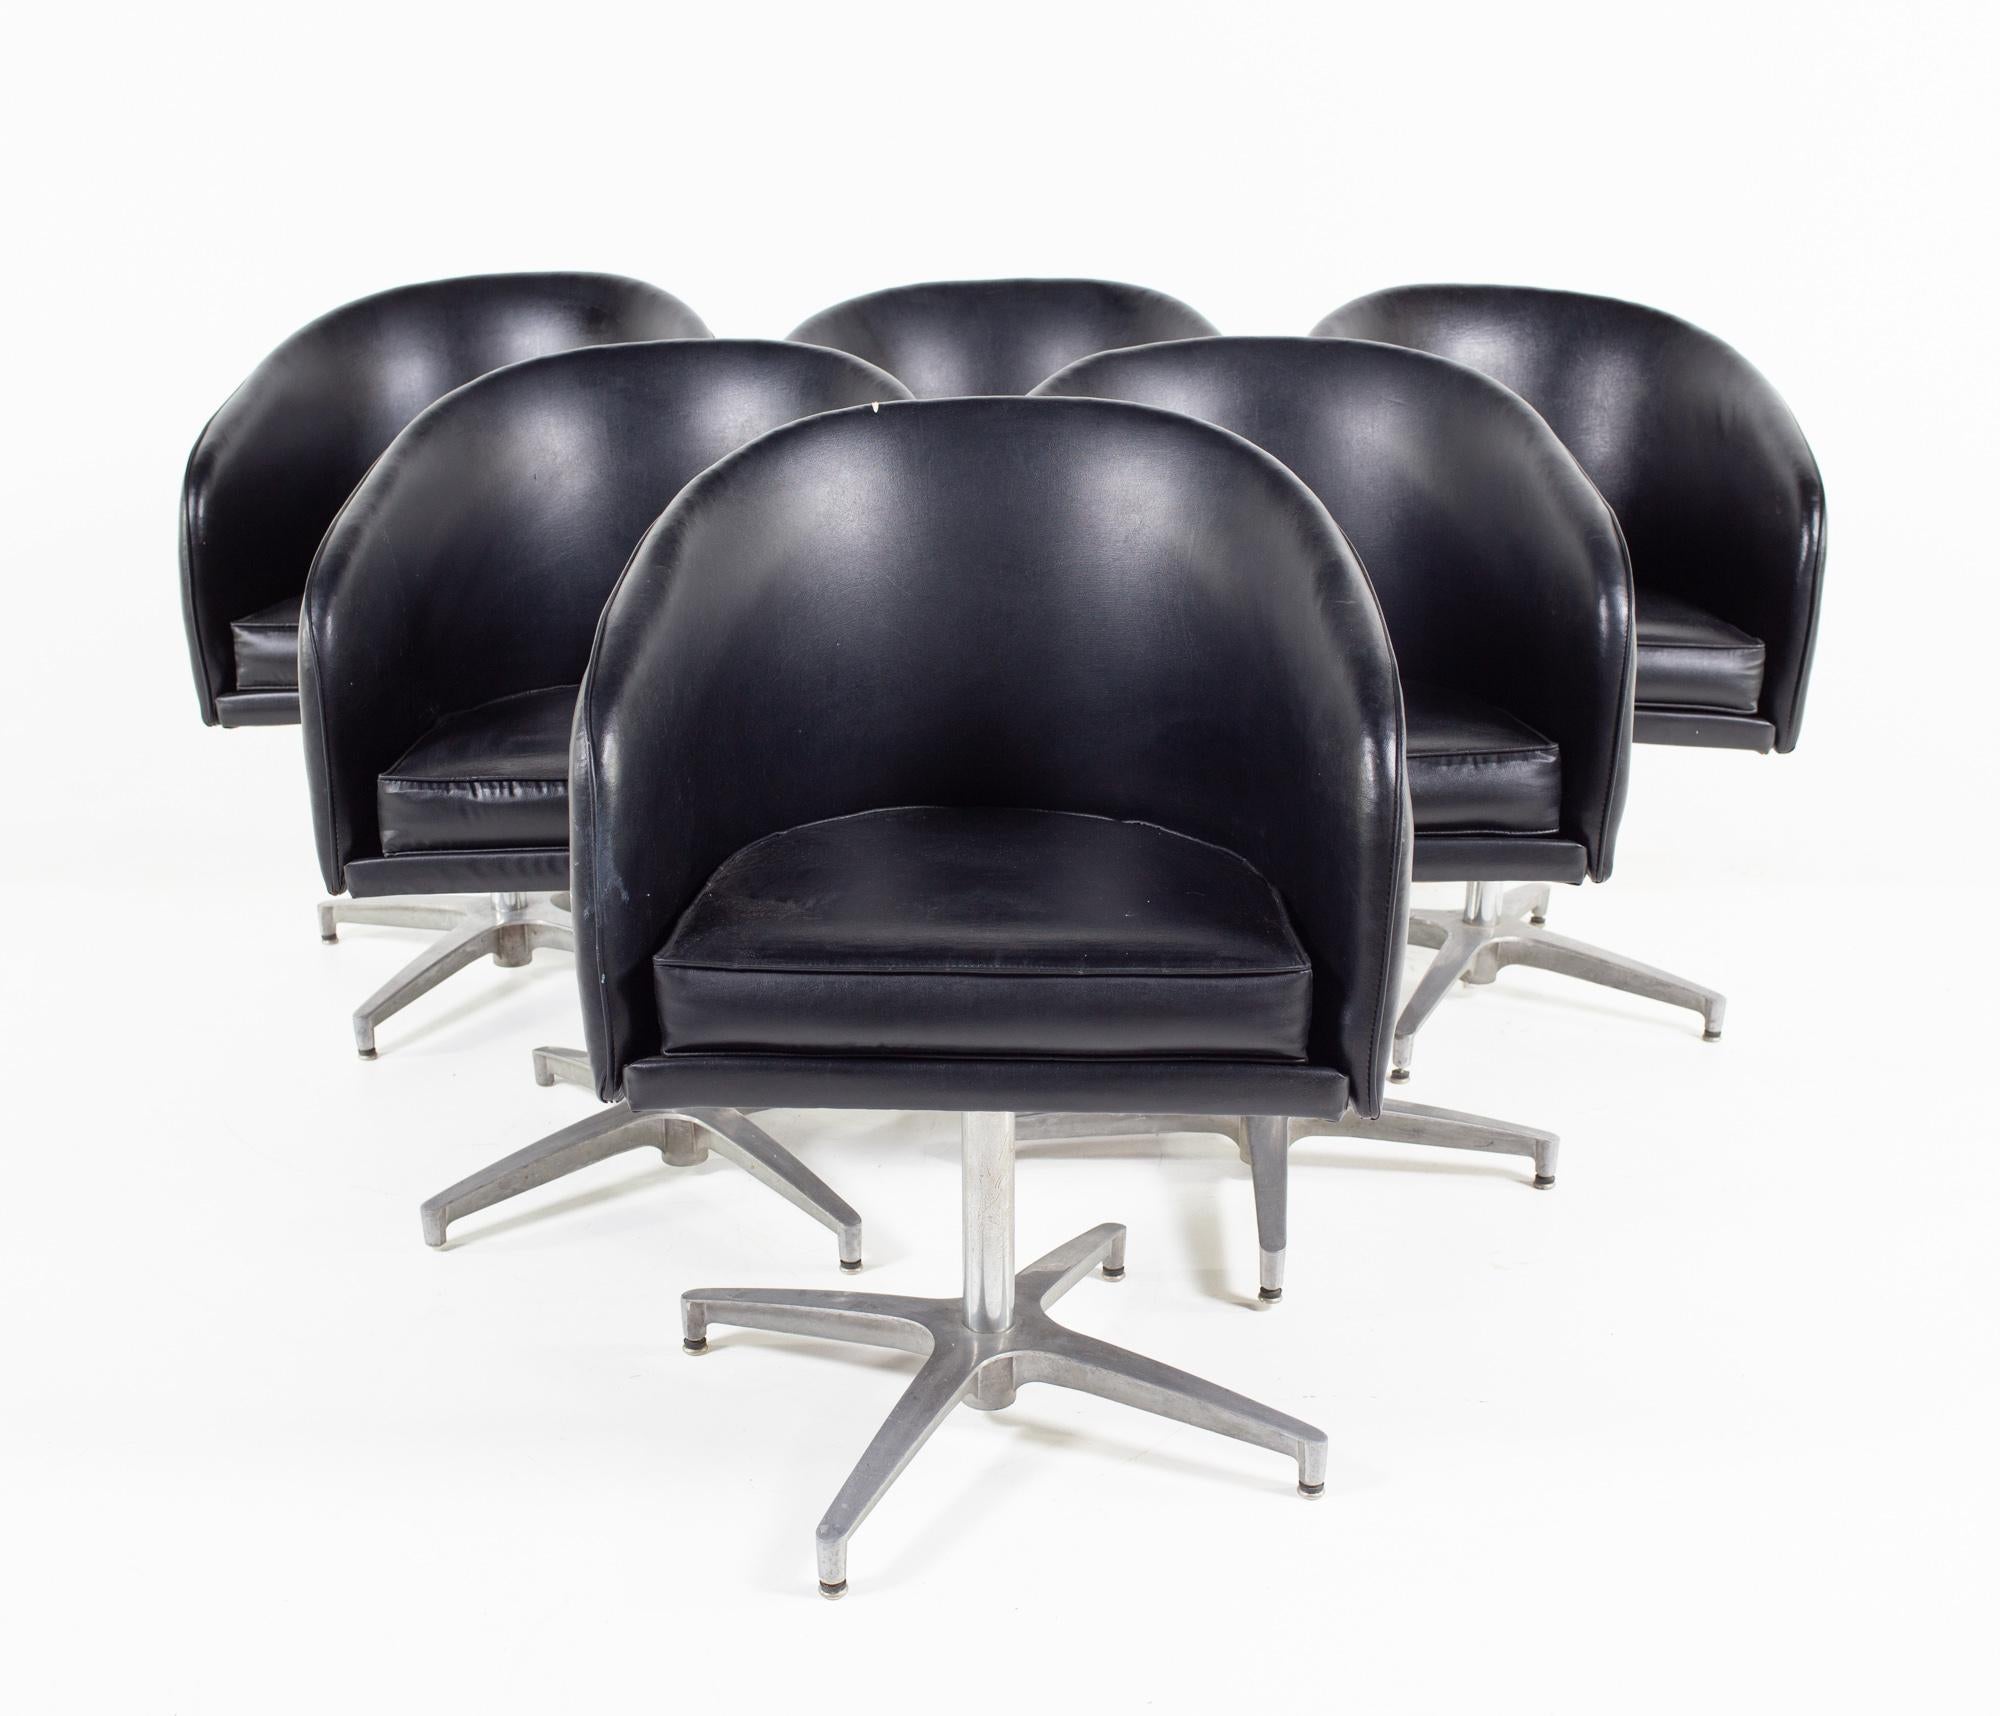 Overman style mid-century black vinyl pod occasional lounge chair - set of 6

Each chair measures: 24 wide x 22.5 deep x 33 inches high, with a seat height of 20 inches

All pieces of furniture can be had in what we call restored vintage